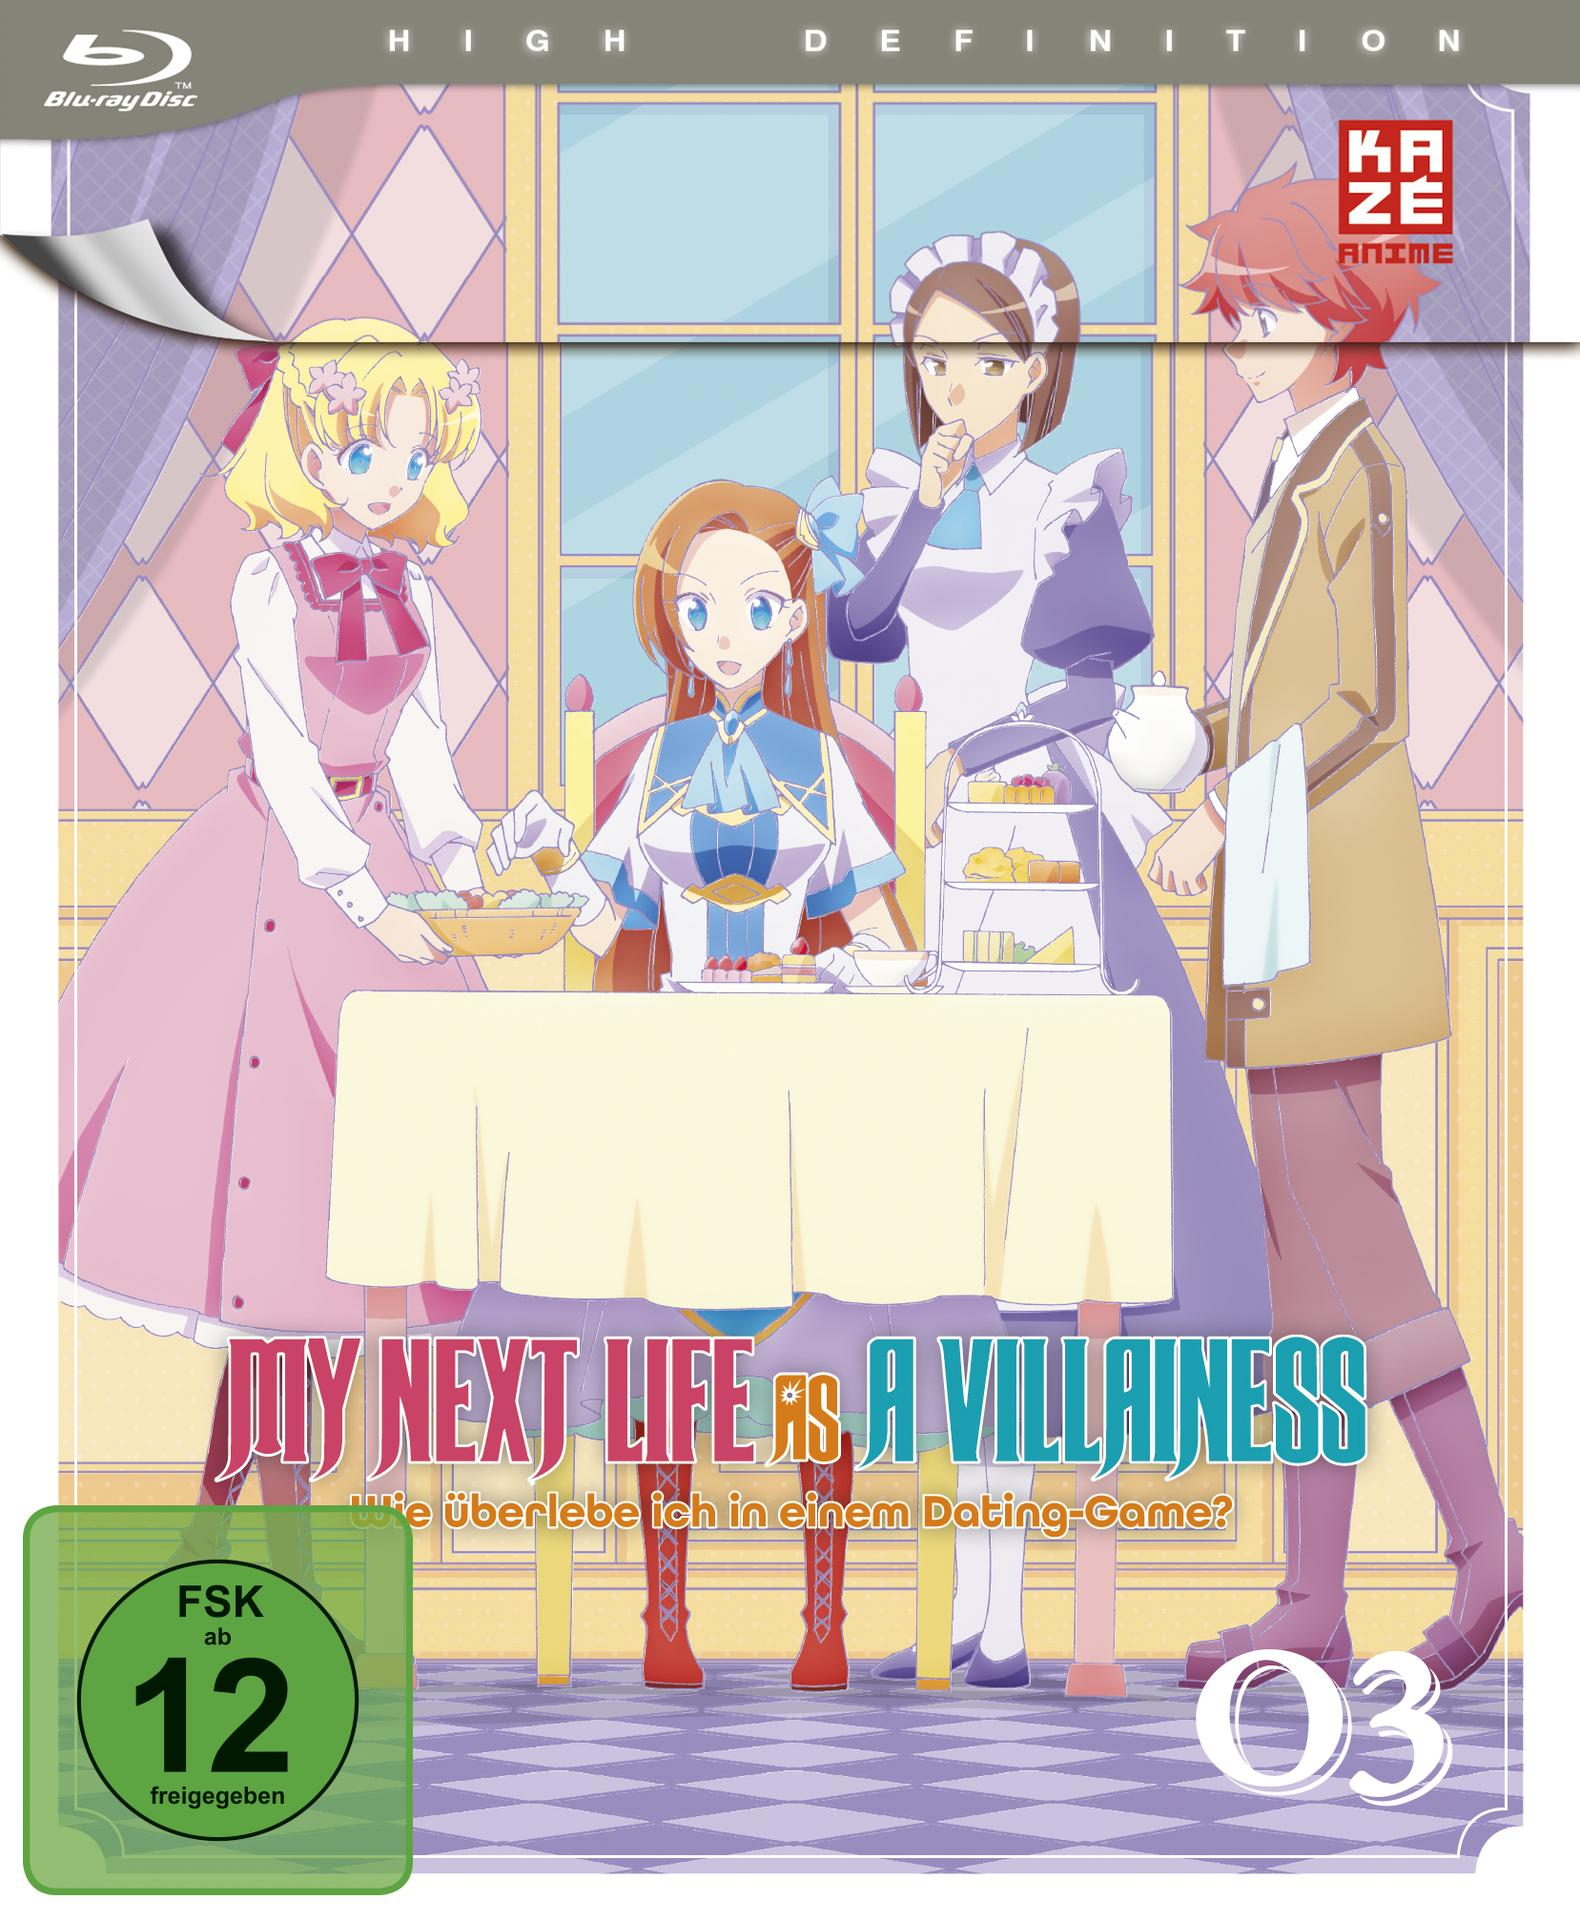 Next Blu-ray My as - a Villainess Life to Doom! Routes All Lead